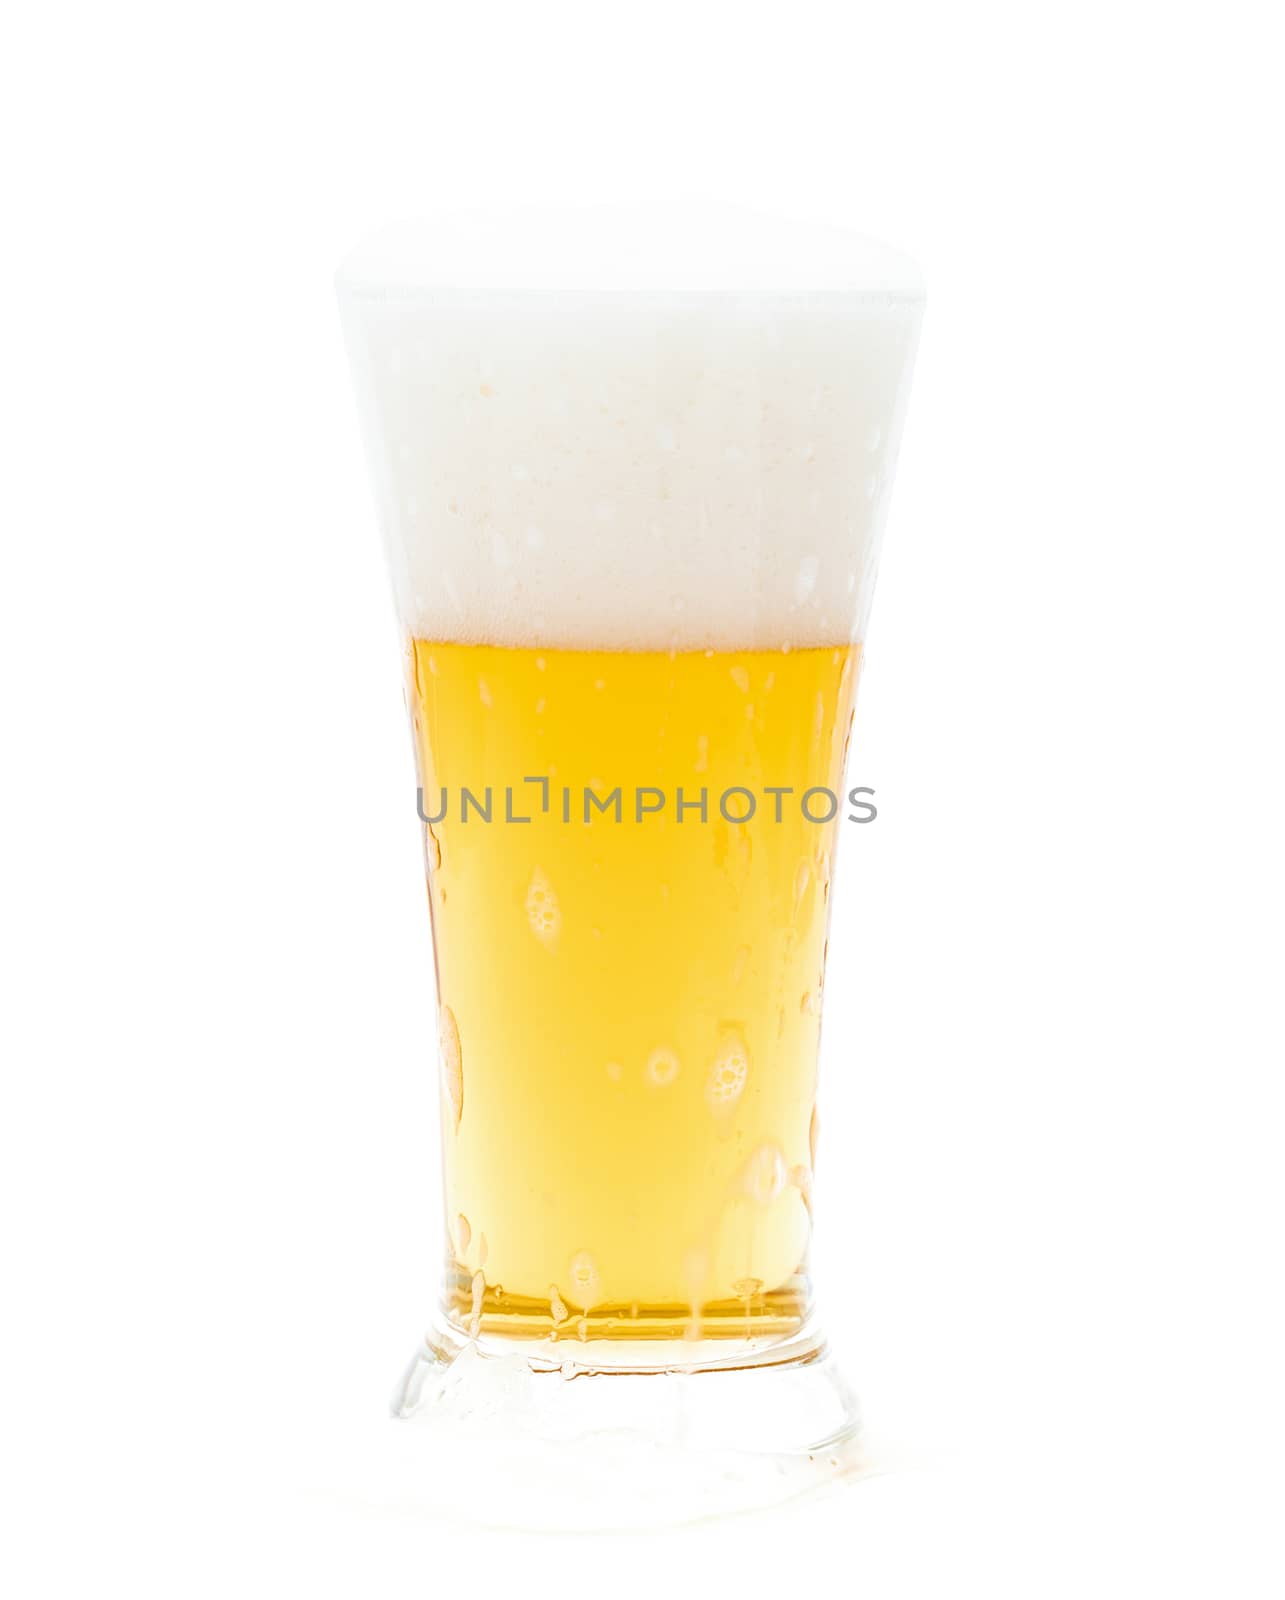 Beer in a glass on white background